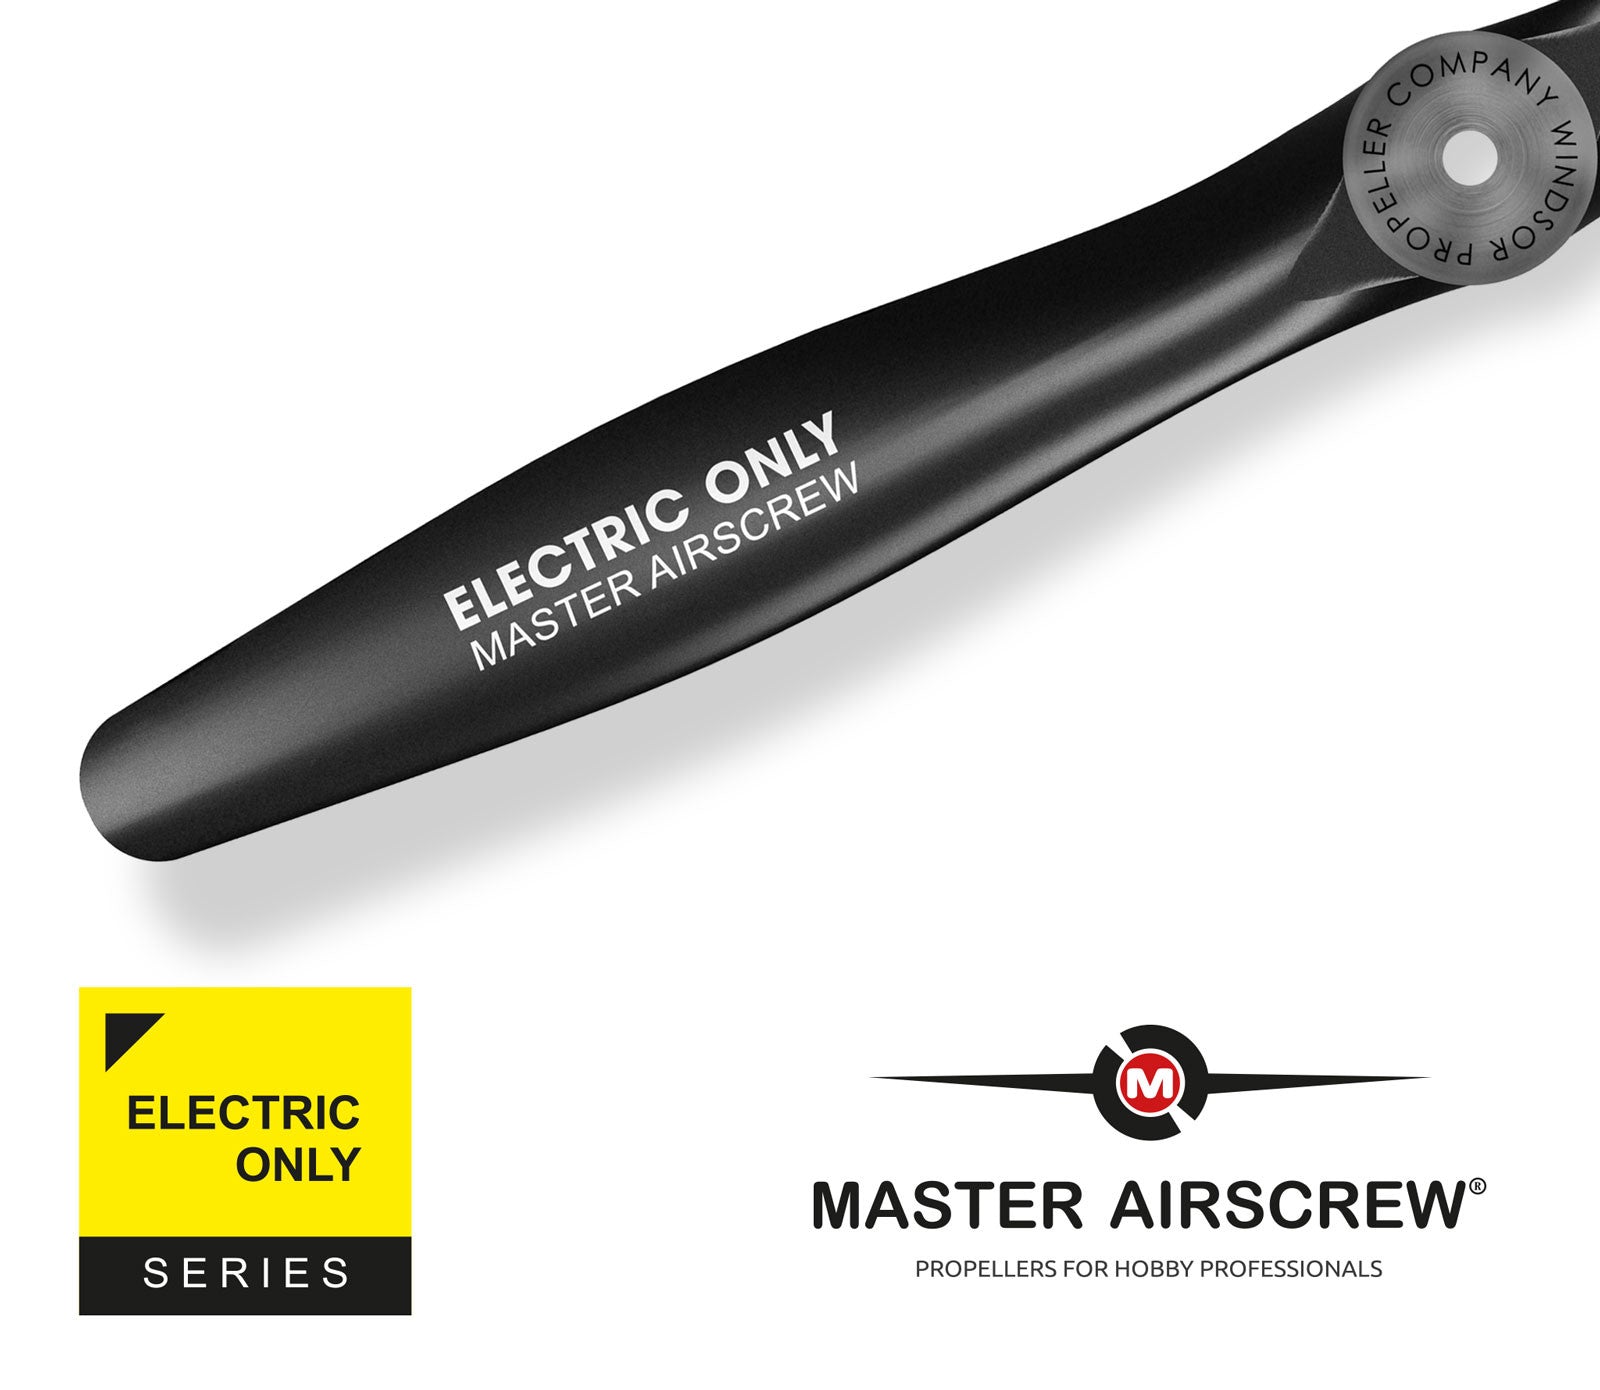 Electric Only - 8x4 Propeller - Master Airscrew